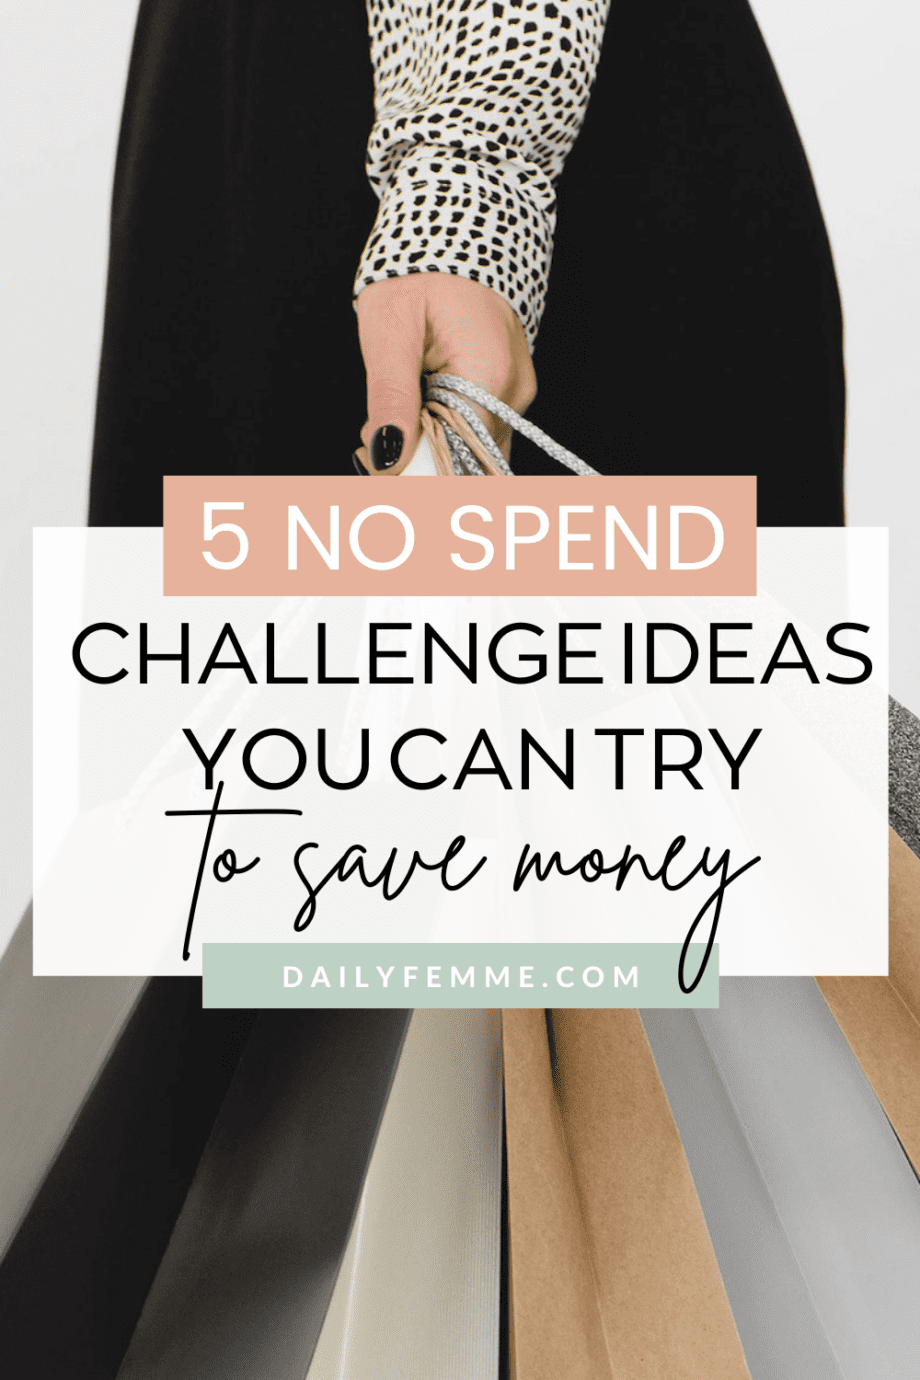 Need a new way to save some money? Try one of these no spend challenge ideas to give a big boost to your savings and reward yourself for your efforts too!